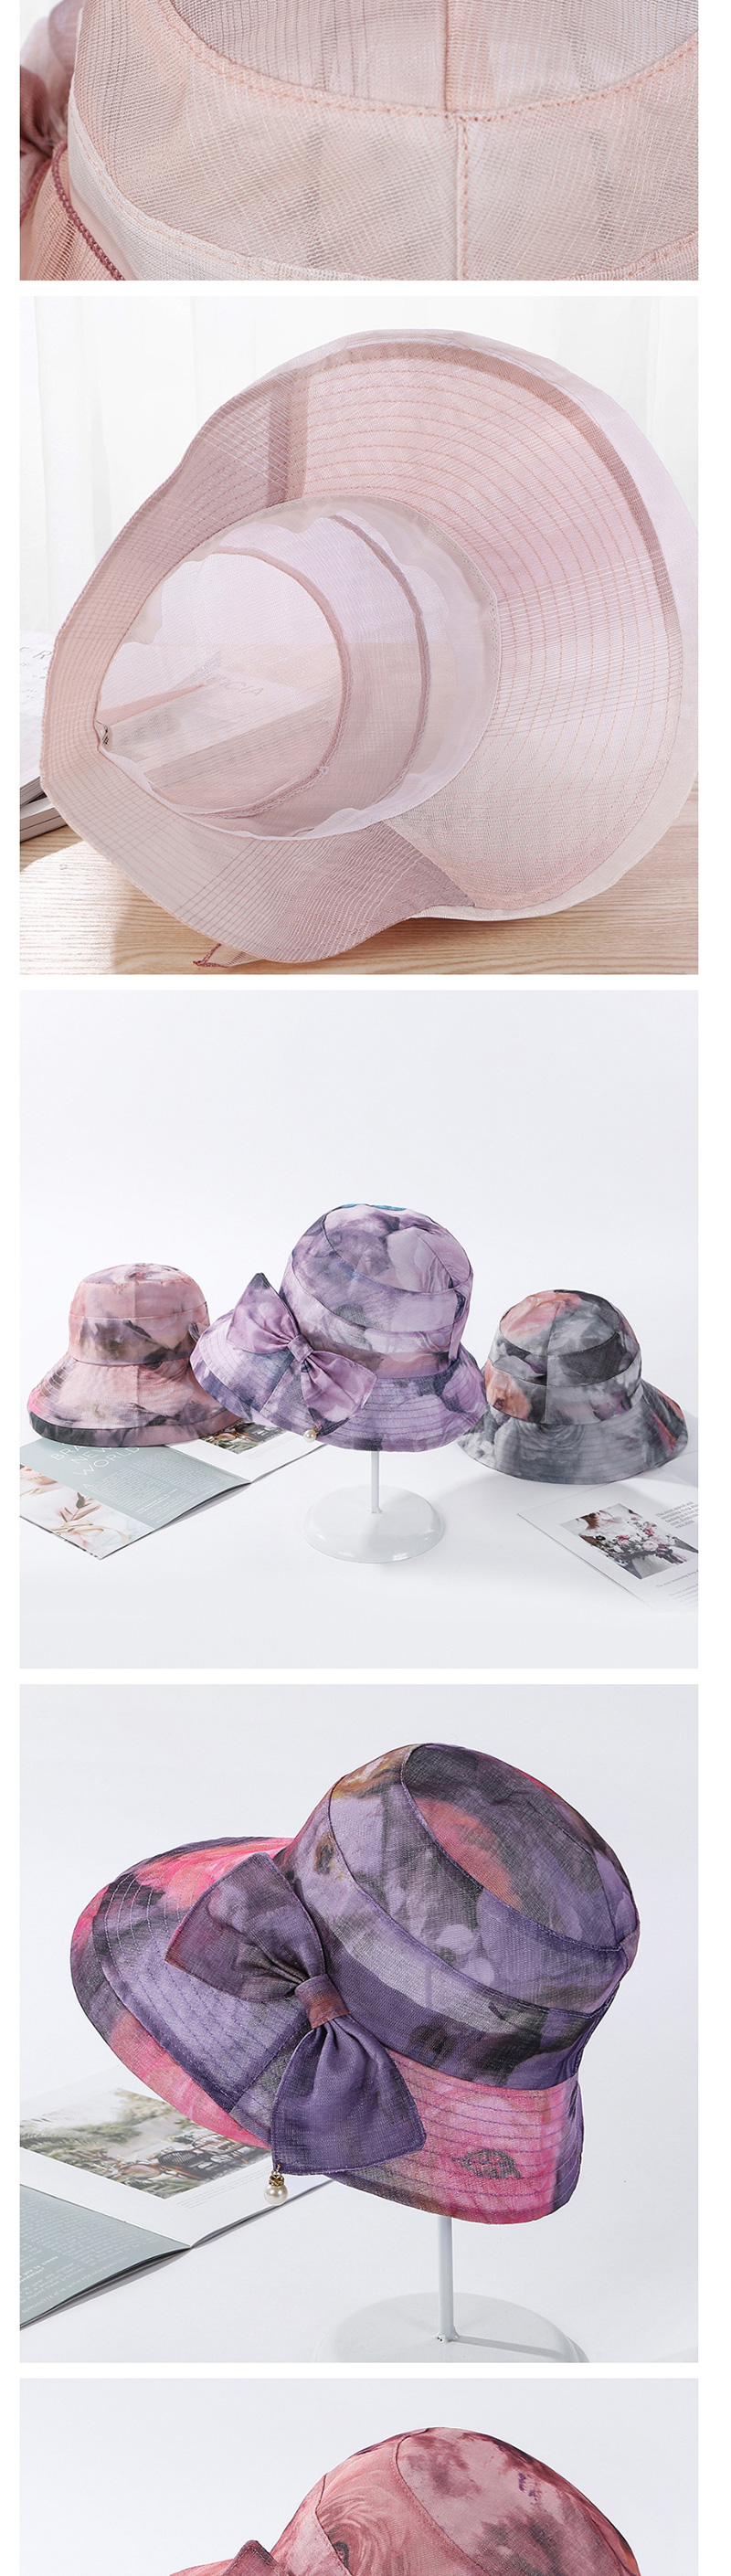 Fashion 9540 Pink Bow-knit Pearl Mesh Contrast Hat,Sun Hats